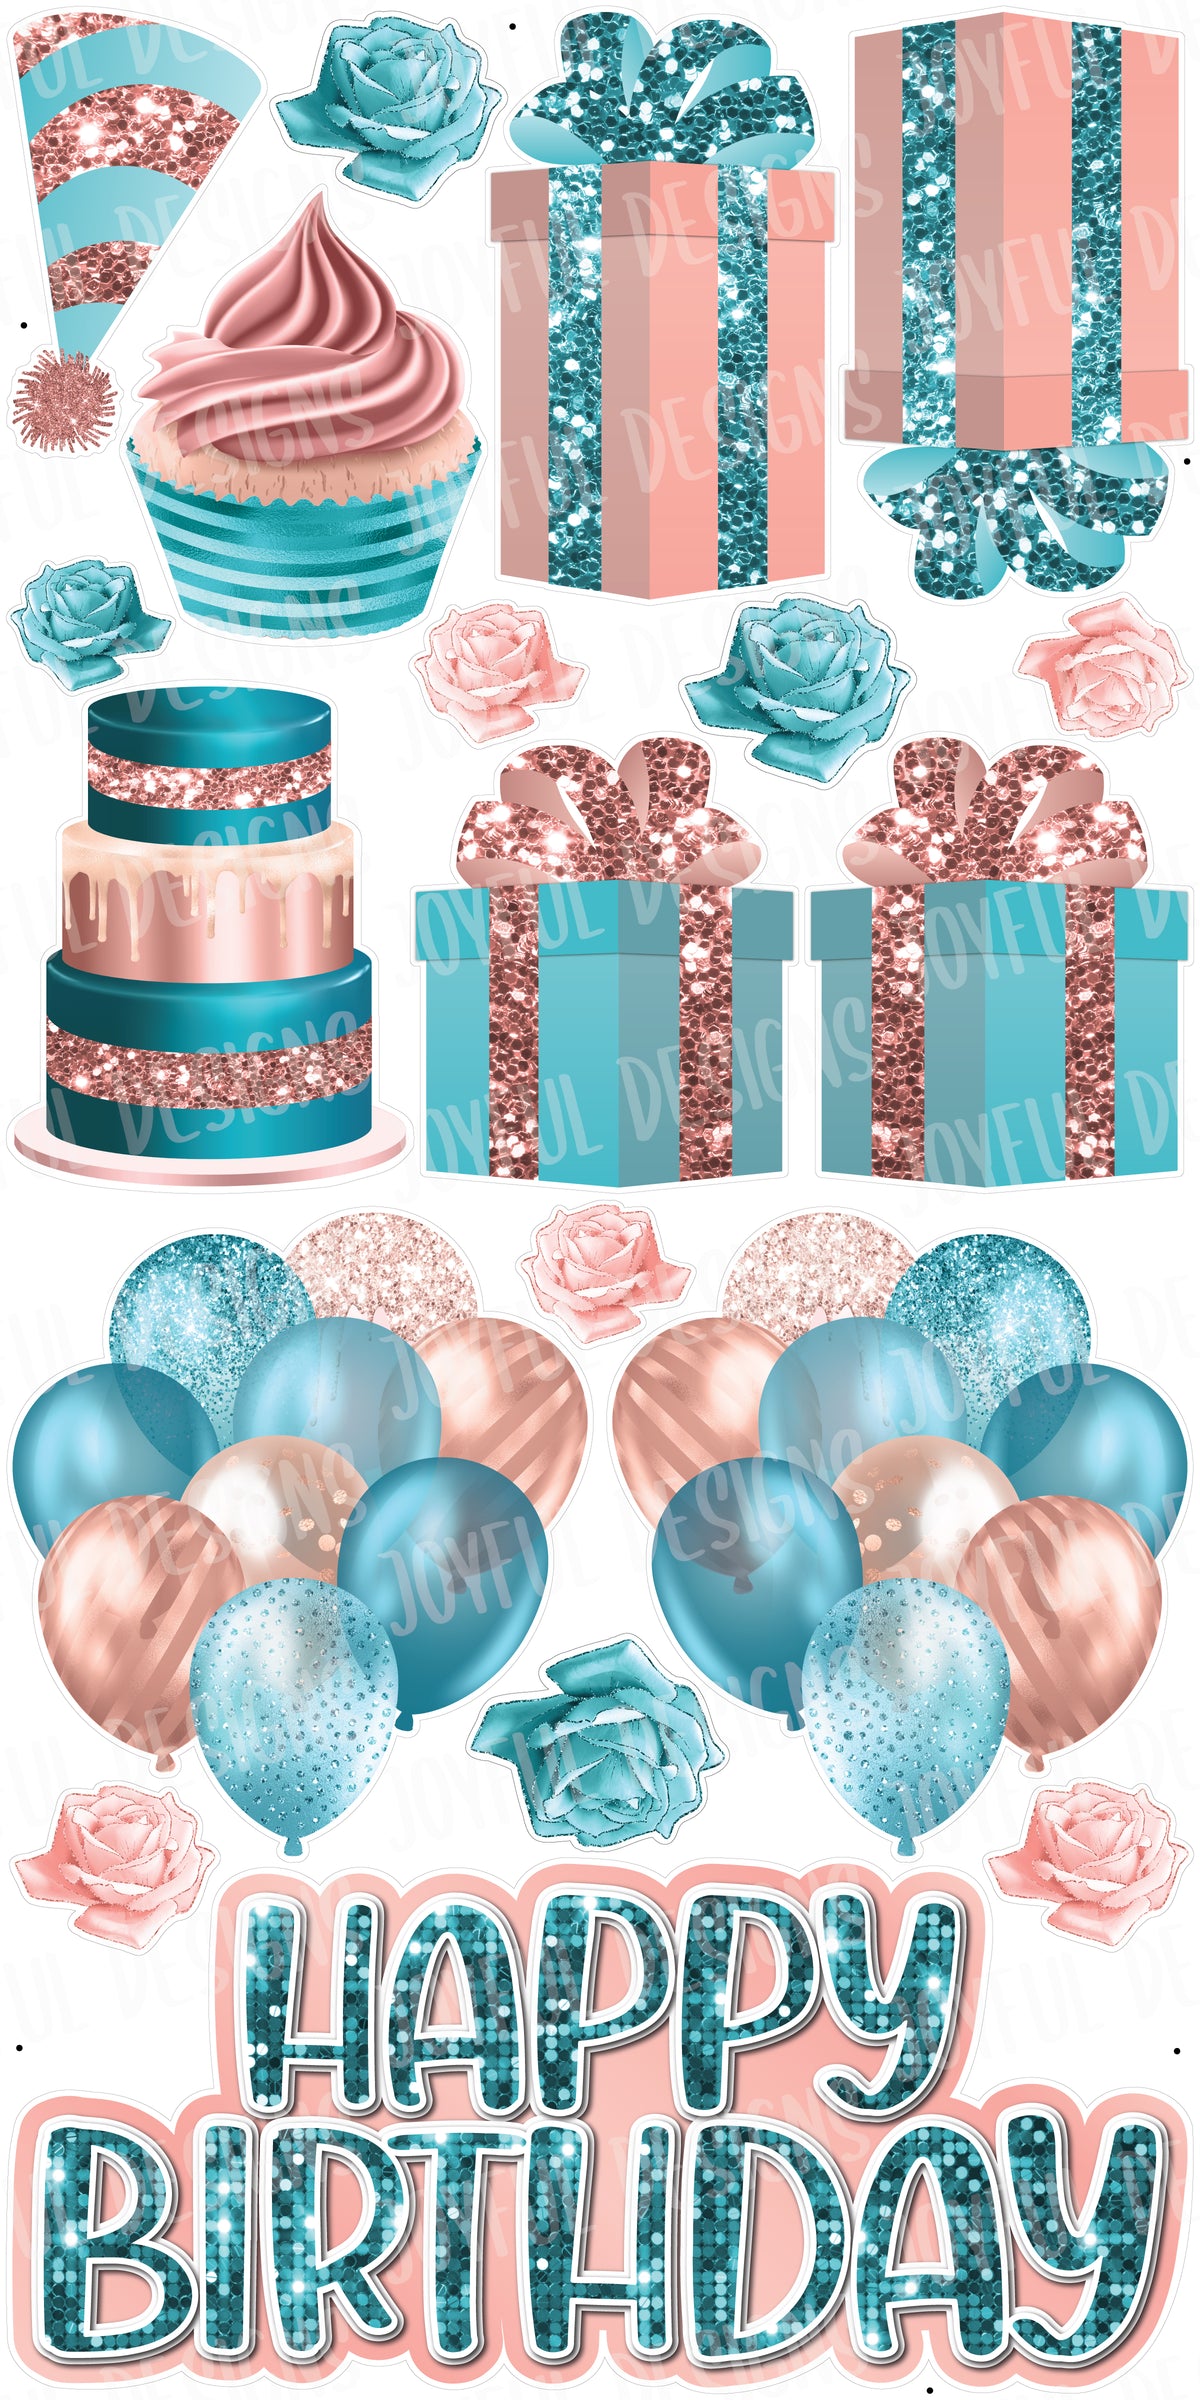 Rose and Tiffany "One and Done" Birthday Centerpiece Set